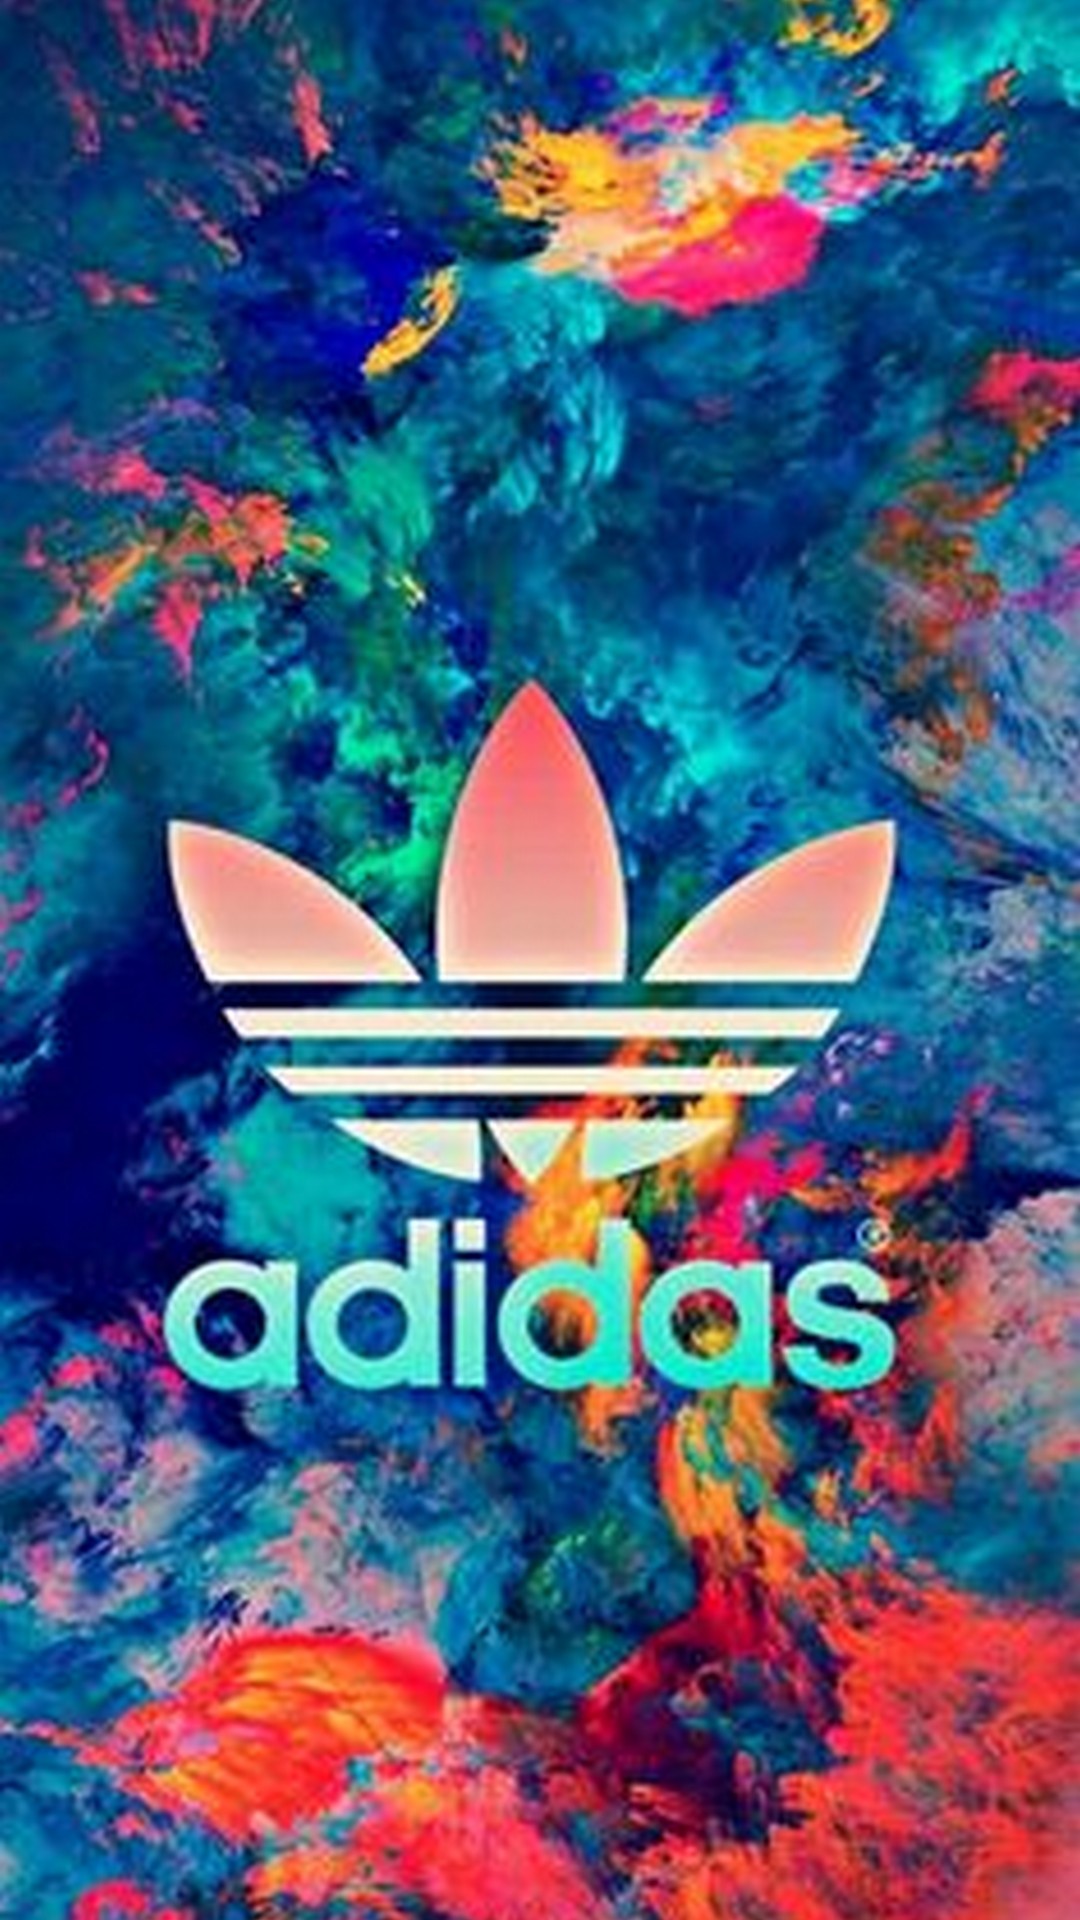 Adidas iPhone Wallpaper in HD with high-resolution 1080x1920 pixel. You can set as wallpaper for Apple iPhone X, XS Max, XR, 8, 7, 6, SE, iPad. Enjoy and share your favorite HD wallpapers and background images